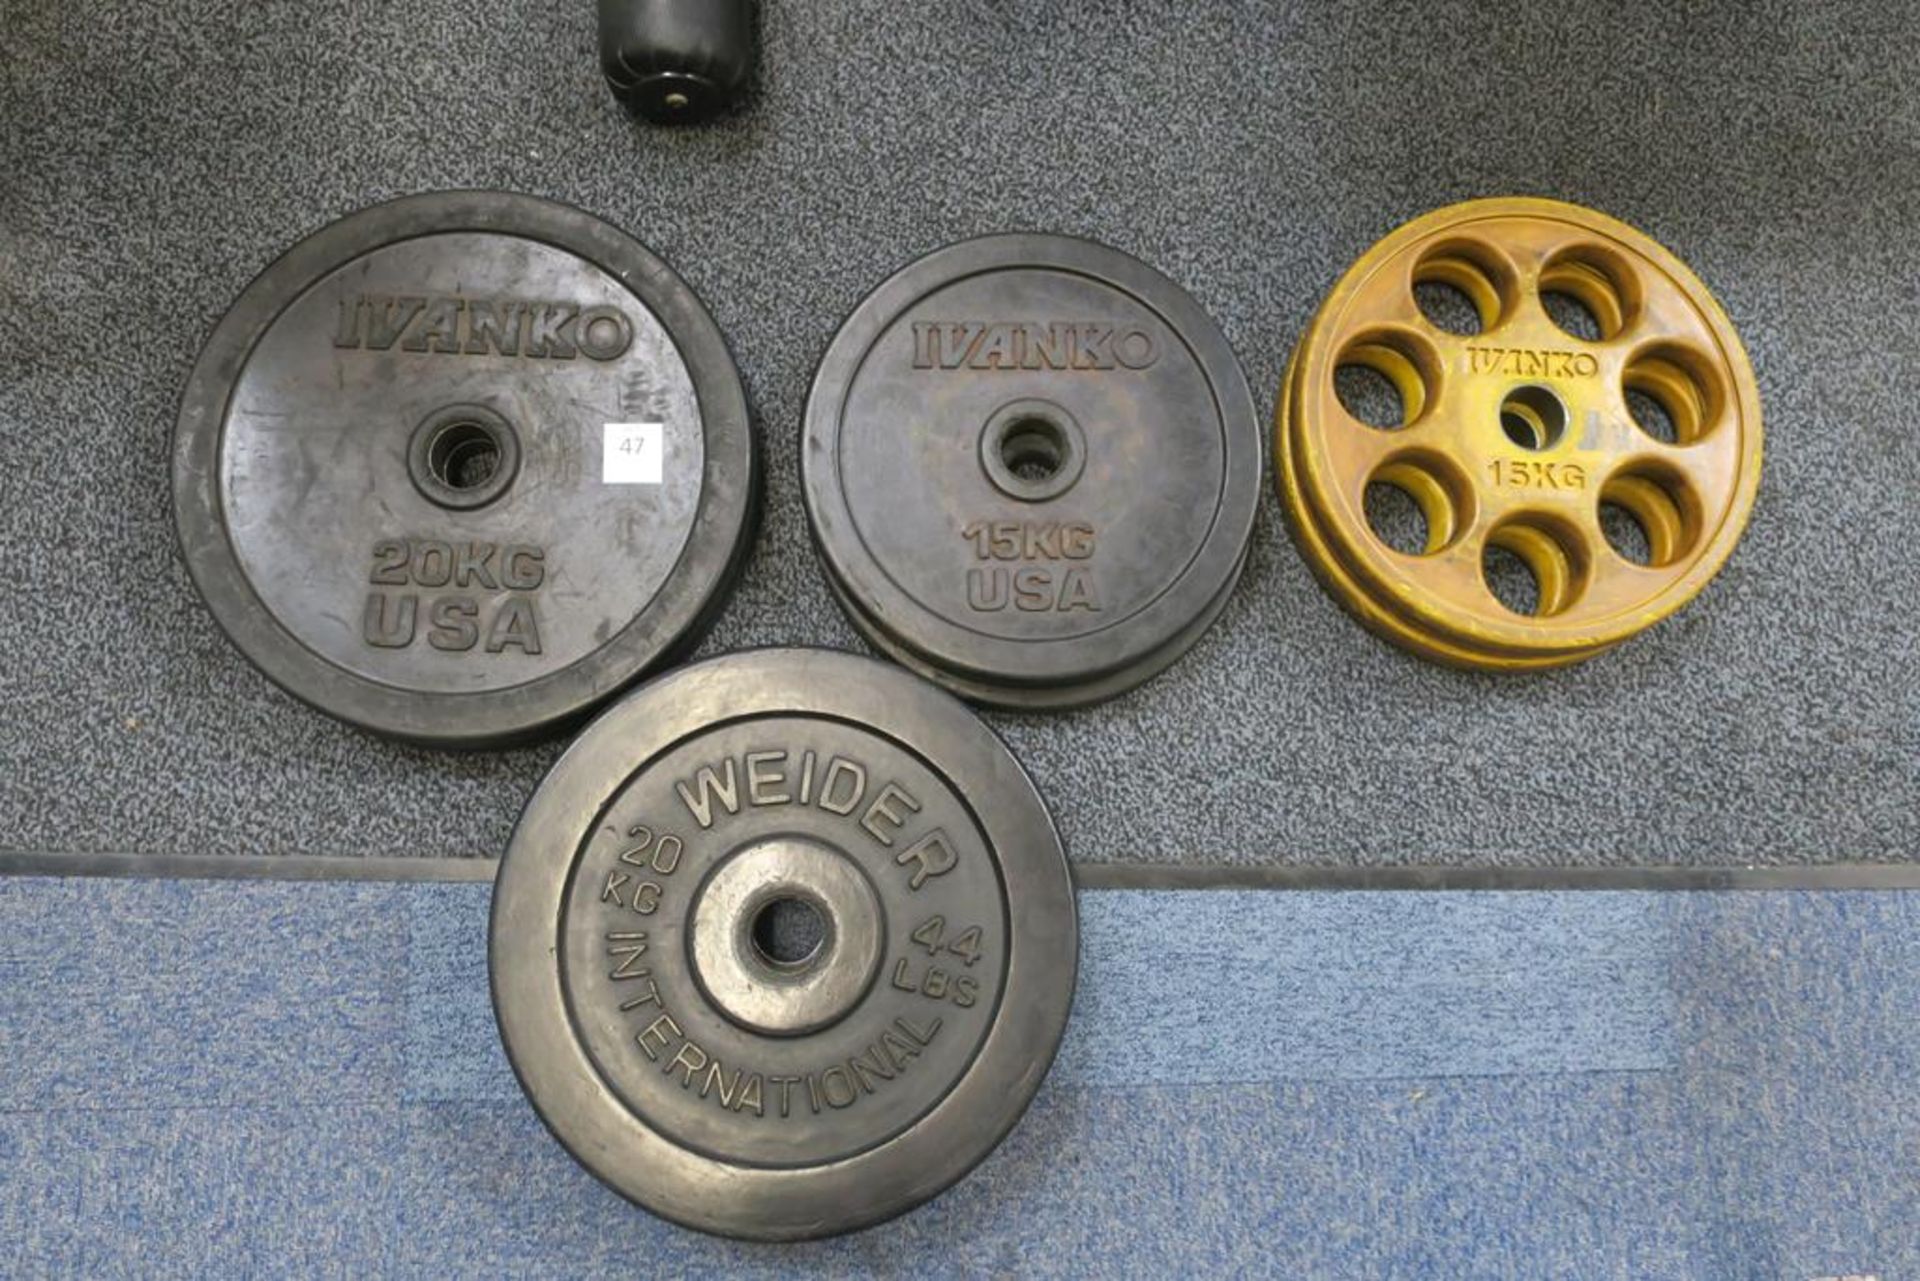 8 x Rubber Covered Dumbbells